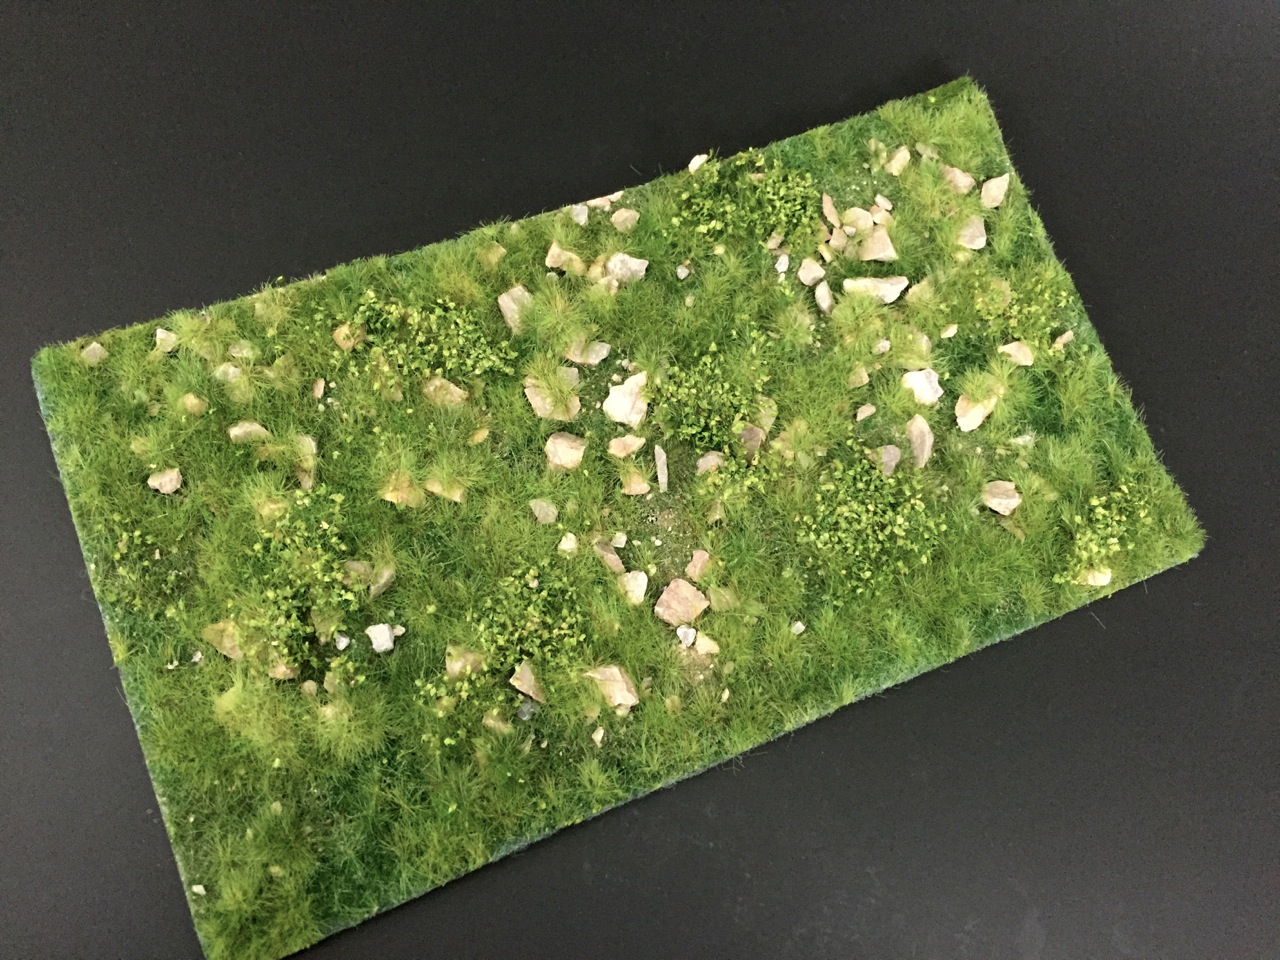 The Modelling News: Clayton gets “on the grass” as he reviews AMMO's latest  scenery mats